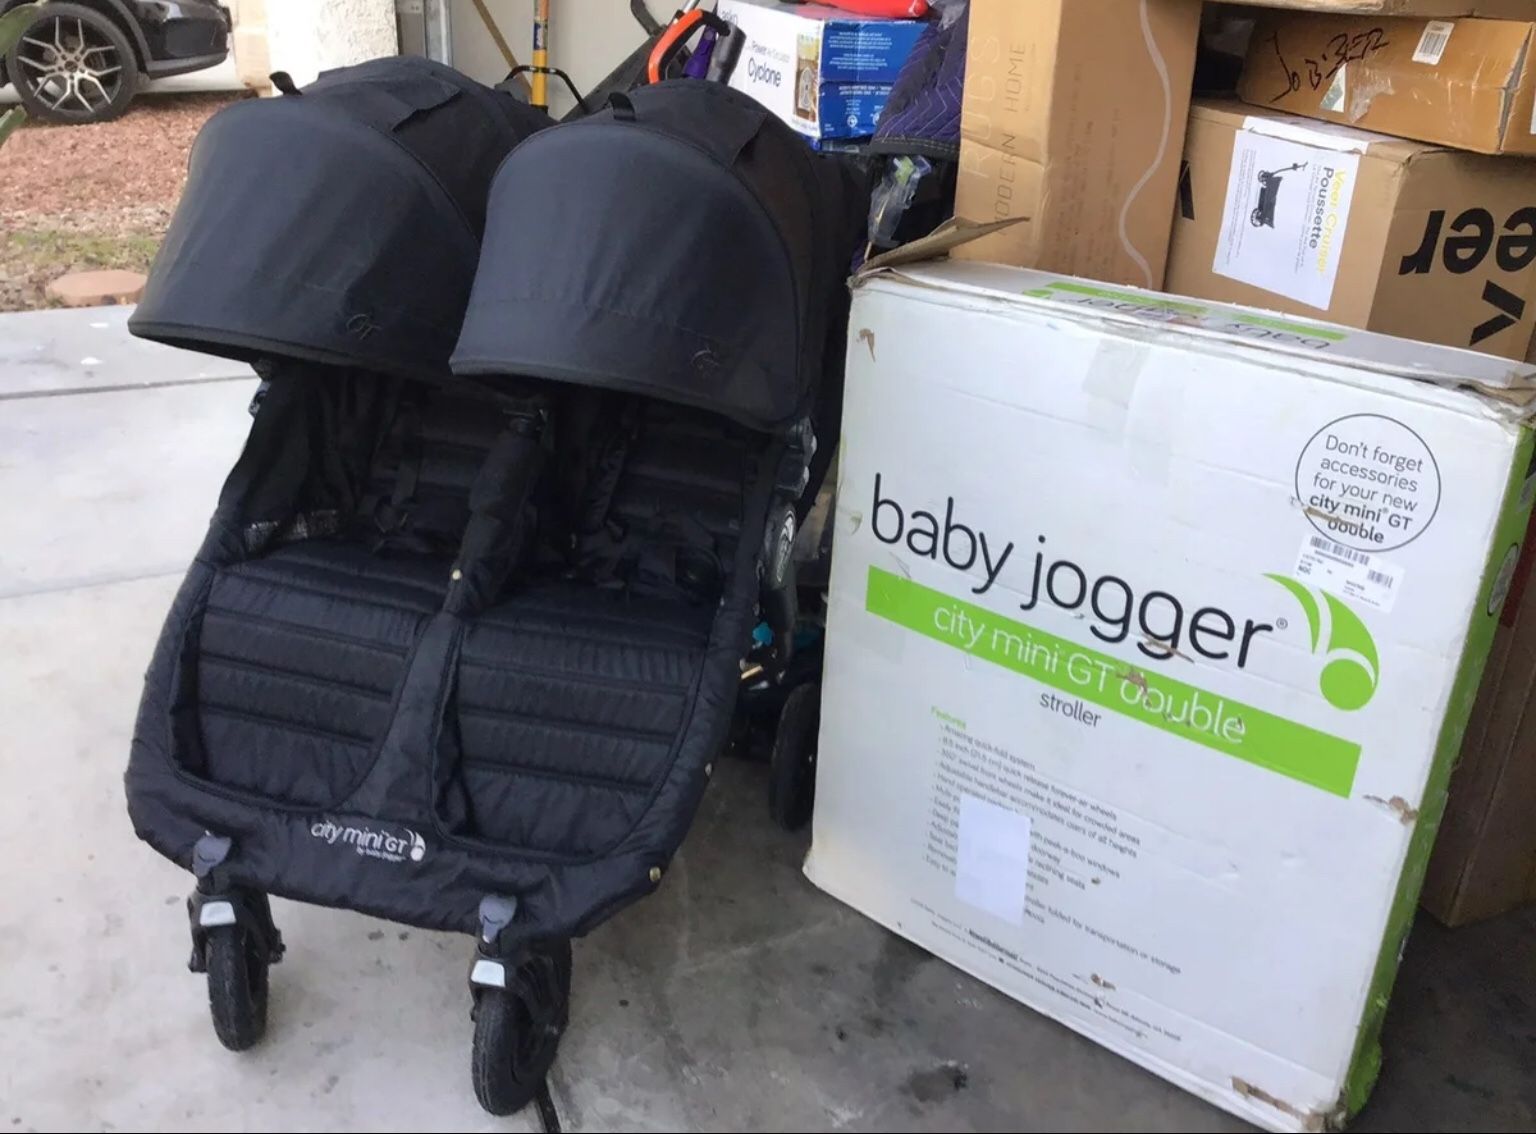 Baby jogger city mini GT double stroller black with all terrain tires & quick fold great condition slight used missing knock on left handle othe